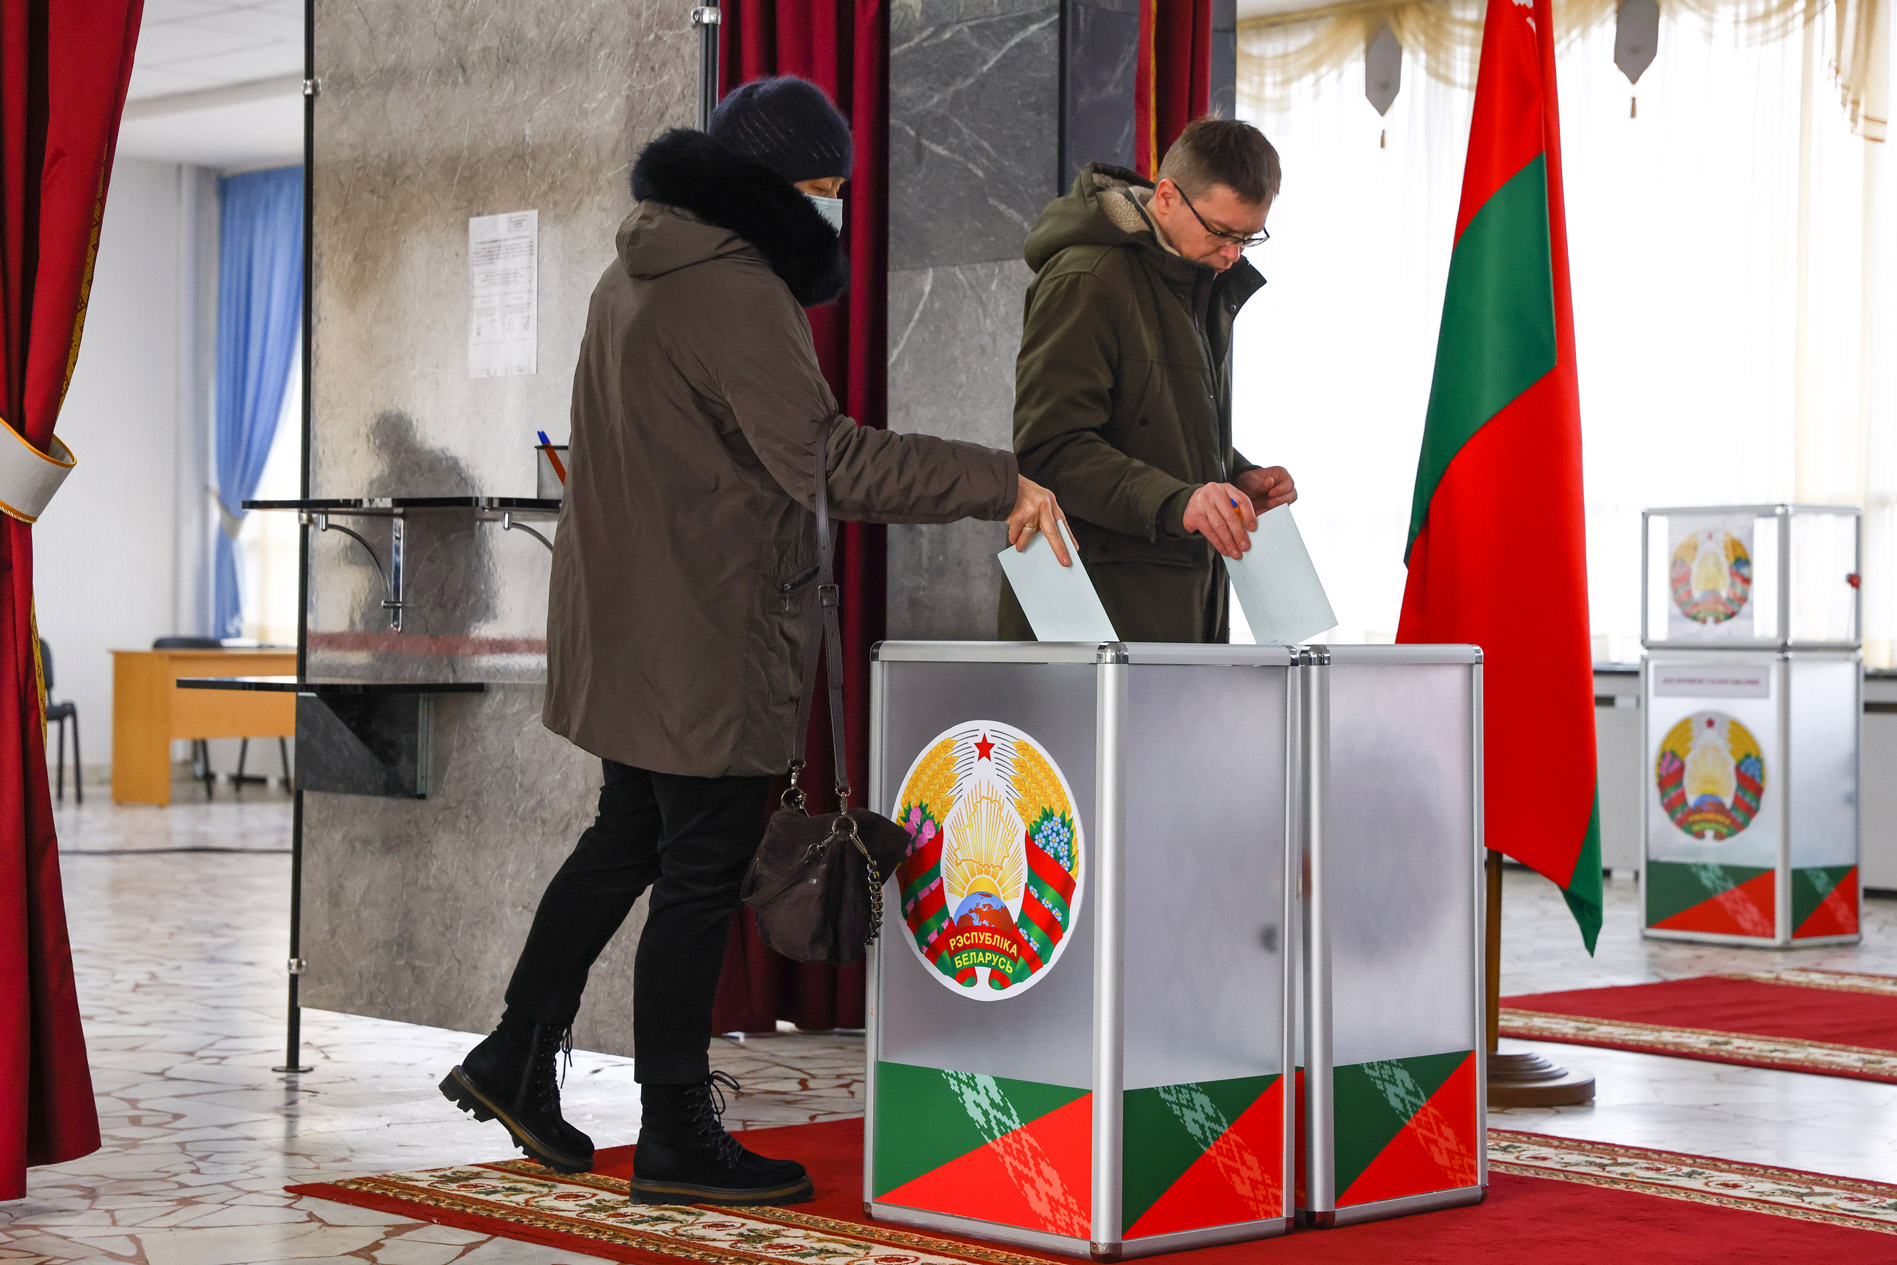 People cast their votes in the 2022 Belarusian constitutional referendum in the capital, Minsk, on Sunday.